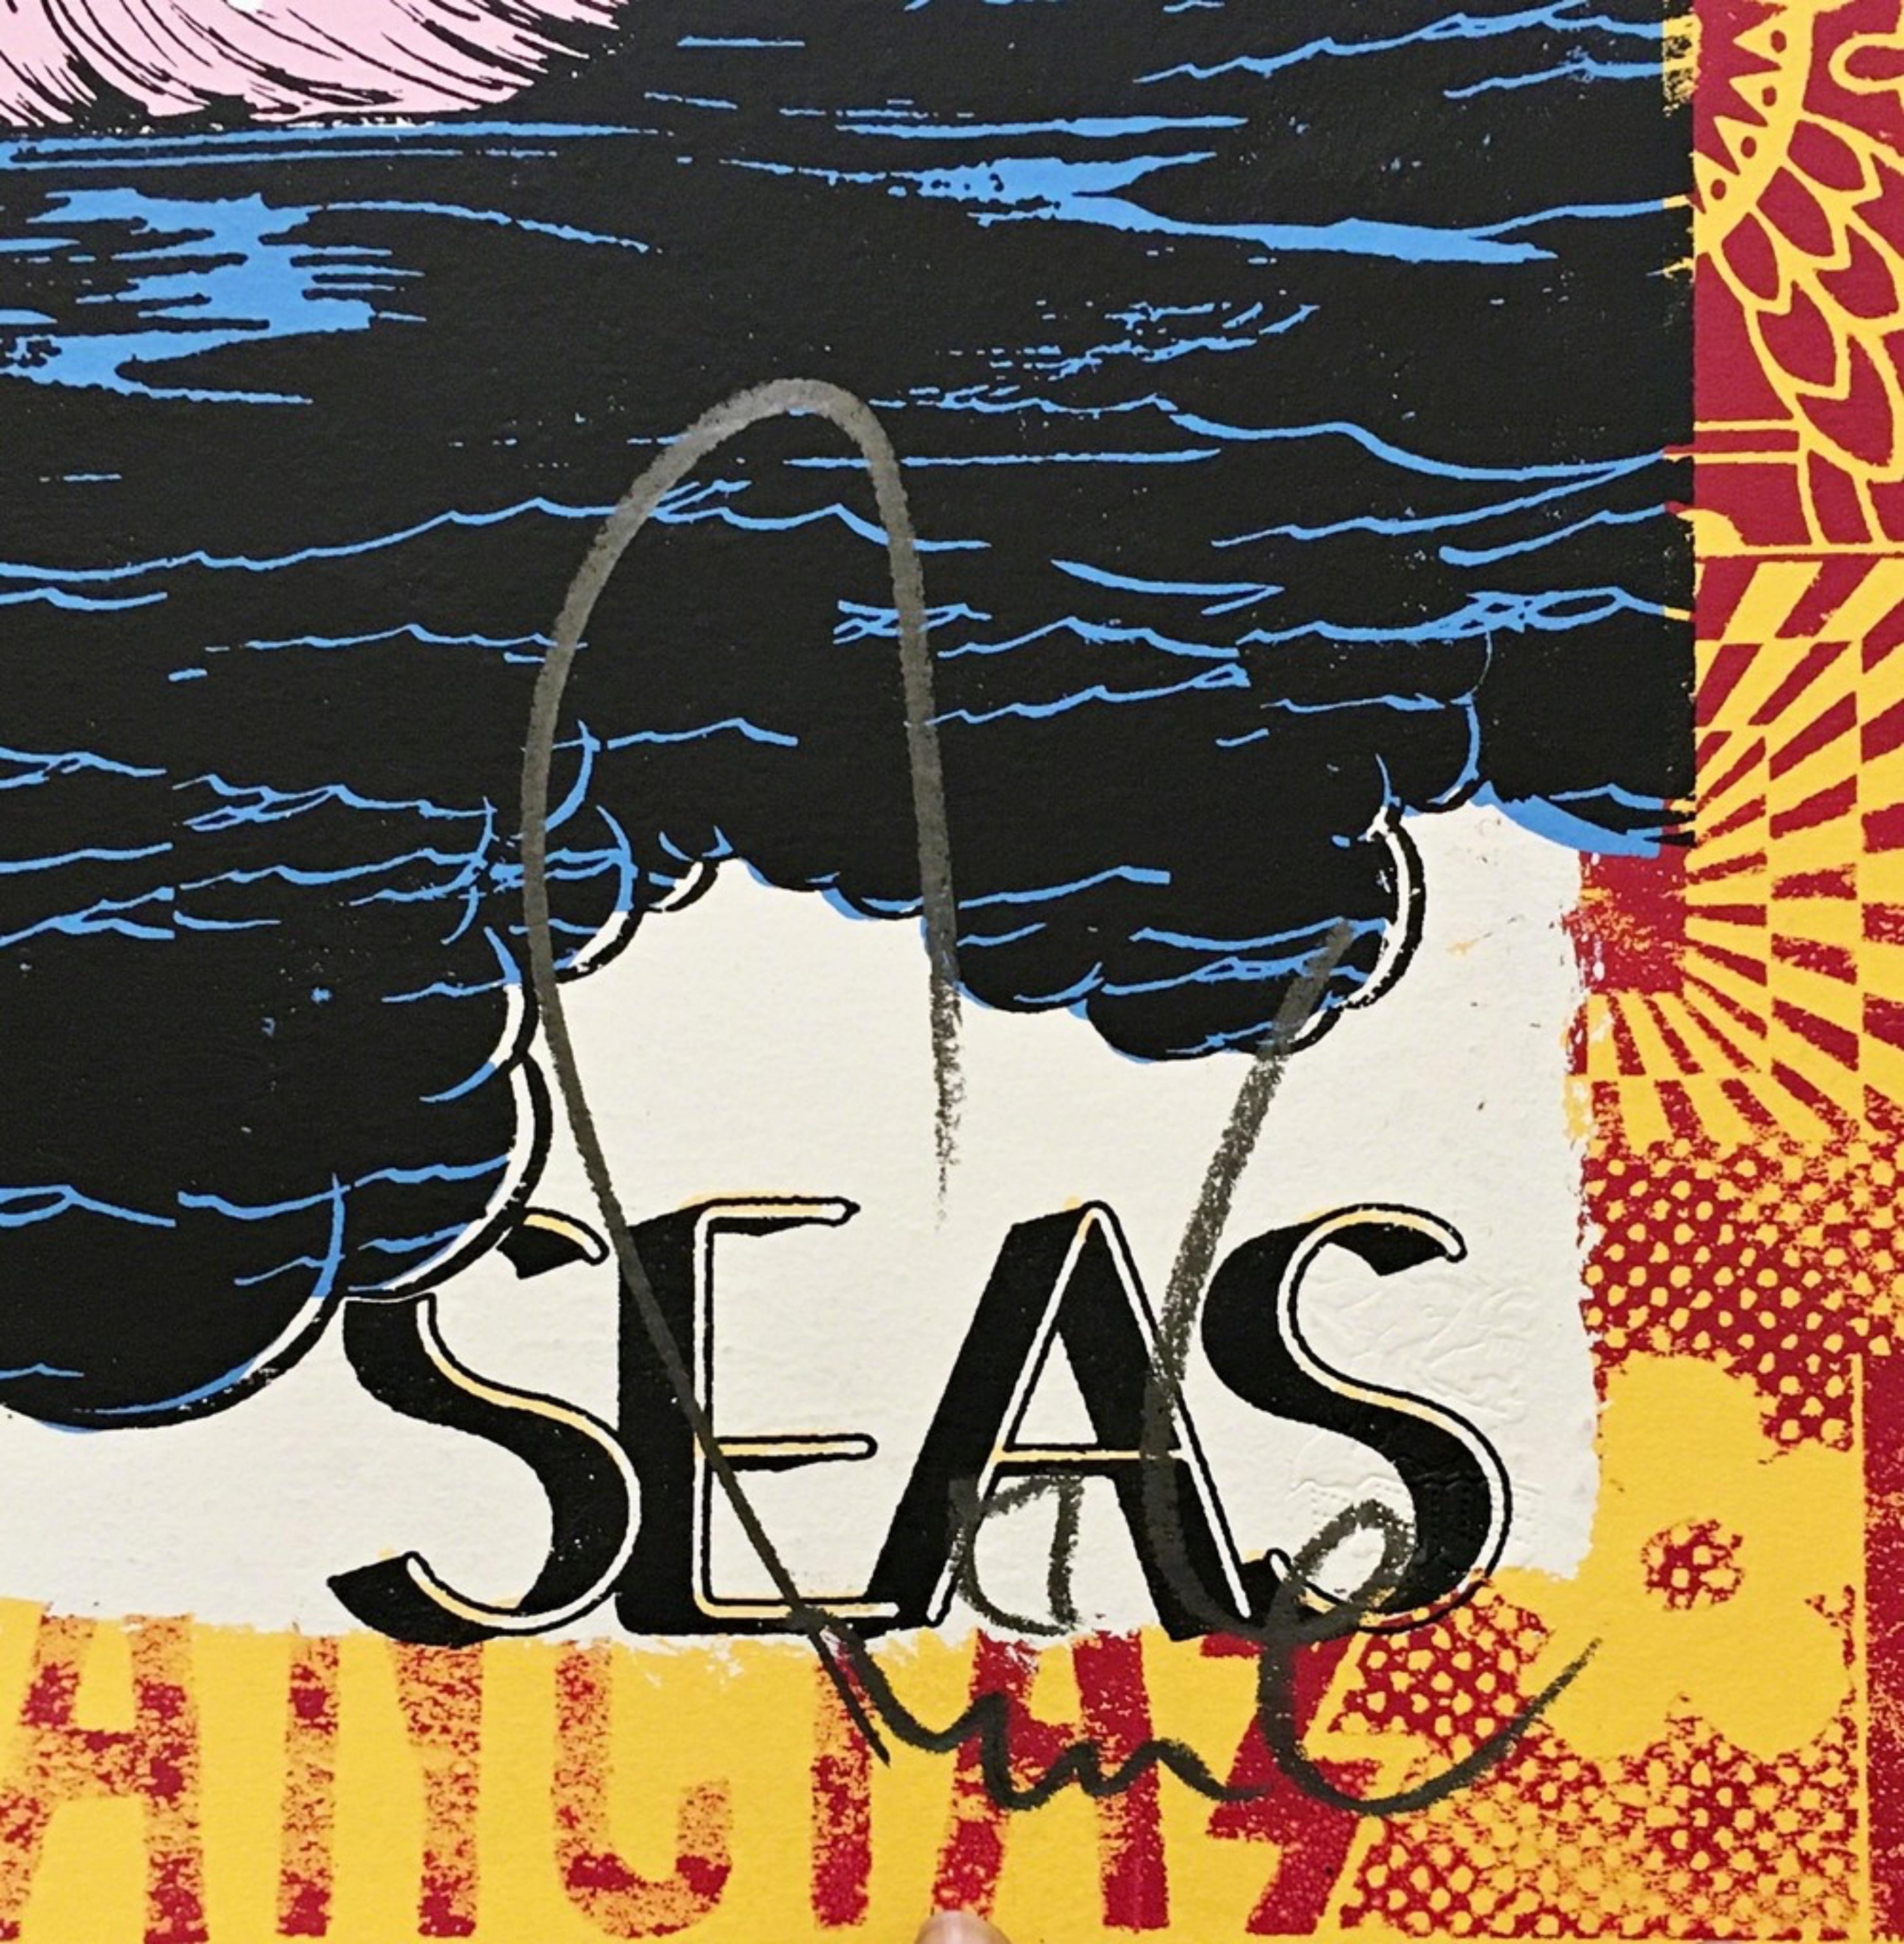 FAILE
Secret Seas, 2019
Acrylic, Silkscreen Ink on Lenox 100 Paper. (two sided)
Hand Signed, titled, dated and numbered 6/250 (each unique)
25 × 19 inches
Hand signed and annotated on the recto front and numbered and dated on the back
Unique